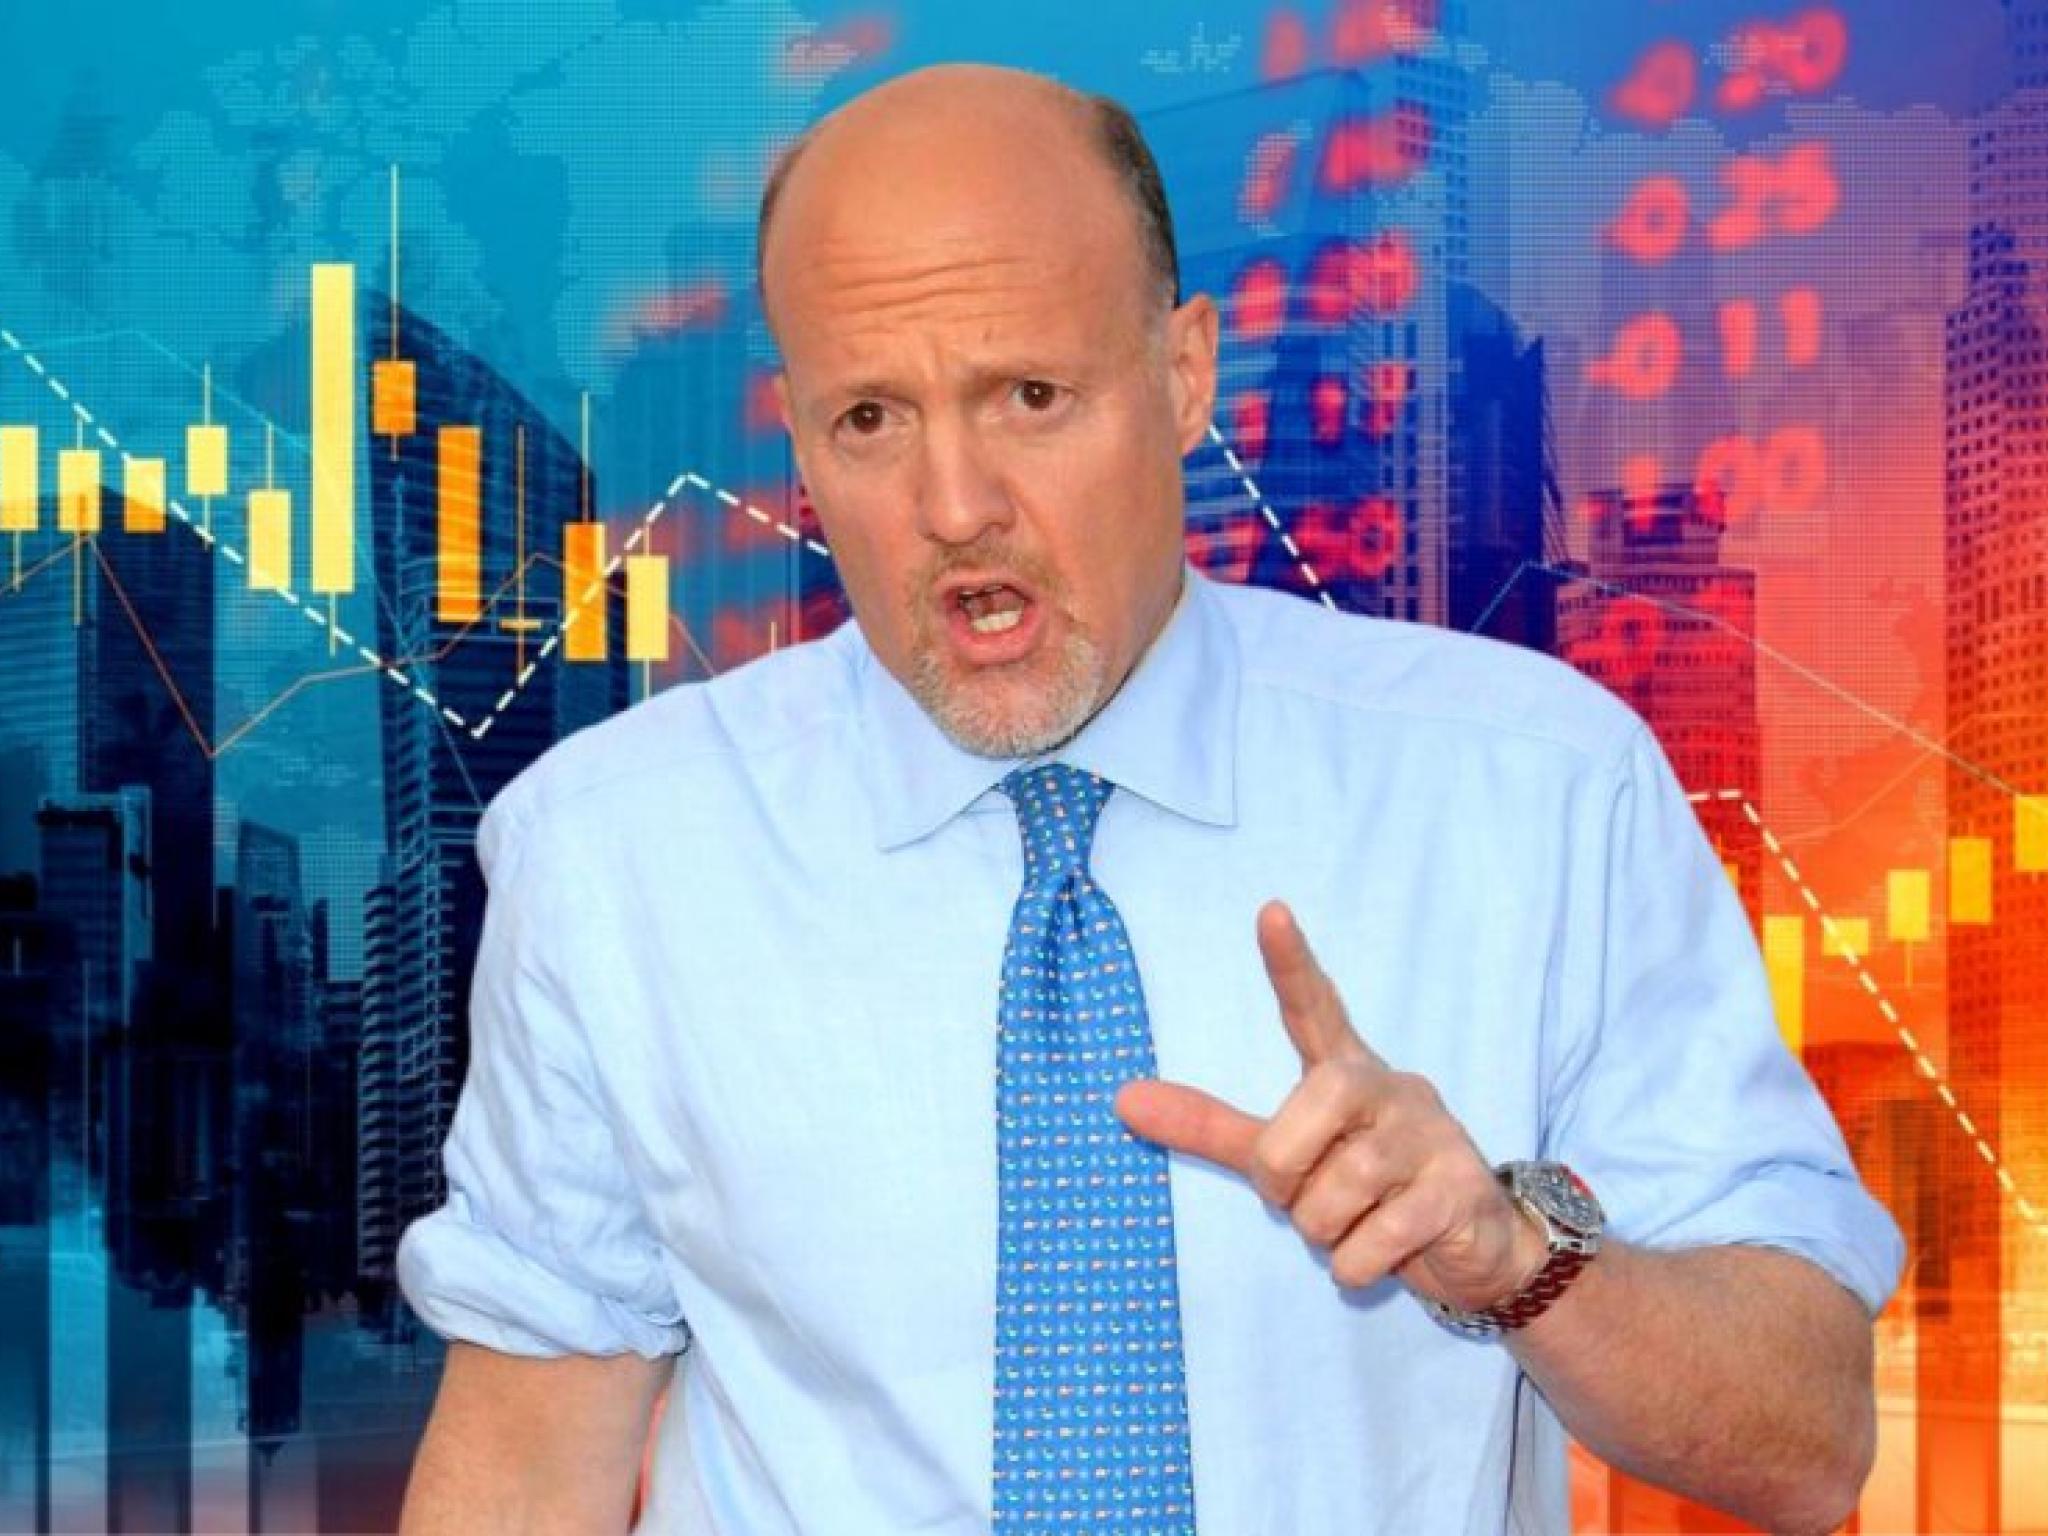  bidens-new-tariffs-on-chinese-imports-are-a-clear-giveaway-to-these-two-tesla-rivals-jim-cramer-says-i-like-this-policy 